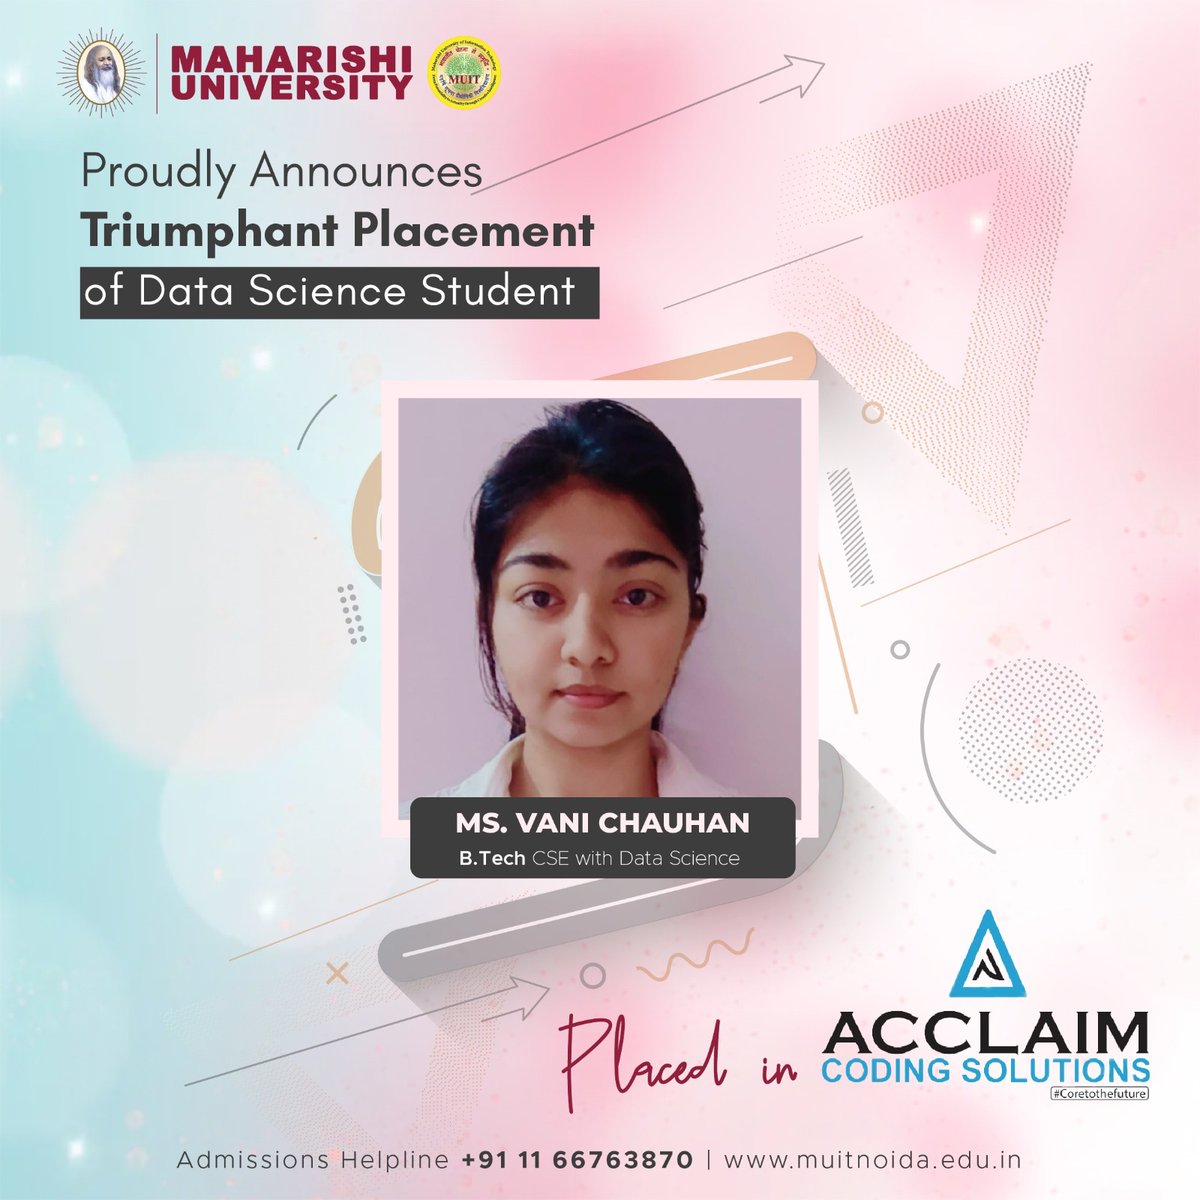 Congratulations to Ms. Vani Chauhan, student of B.Tech CSE with Data Science, for getting placed at Acclaim Coding Solutions! It is a great accomplishment and a testament to your hard work and dedication
#placements2023 #maharishiuniversity #DataScience